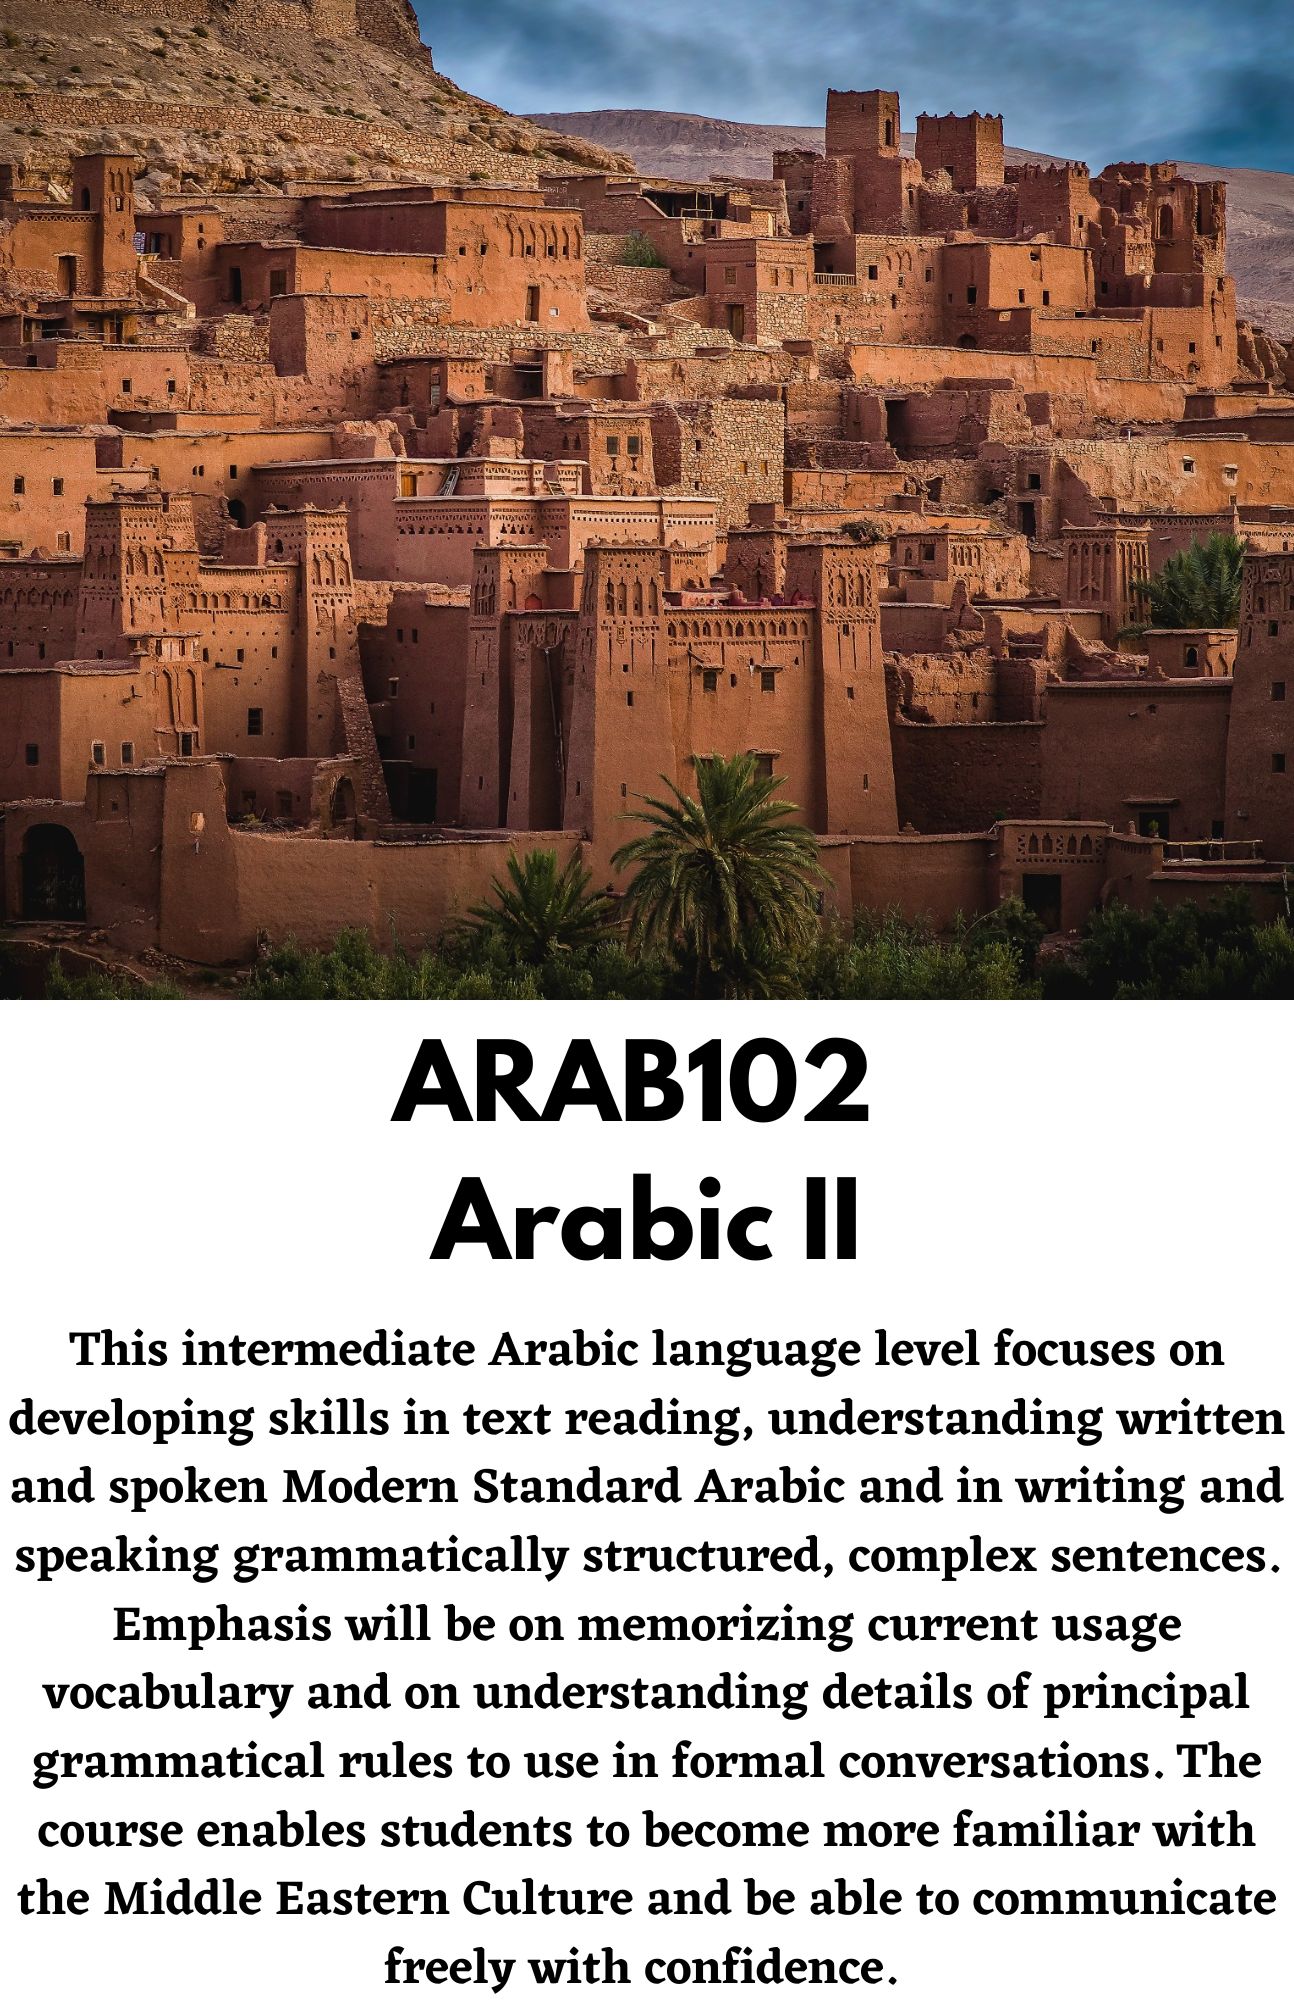 ARAB102  Arabic II. This intermediate Arabic language level focuses on developing skills in text reading, understanding written and spoken Modern Standard Arabic and in writing and speaking grammatically structured, complex sentences. Emphasis will be on memorizing current usage vocabulary and on understanding details of principal grammatical rules to use in formal conversations. The course enables students to become more familiar with the Middle Eastern Culture and be able to communicate freely with confidence.